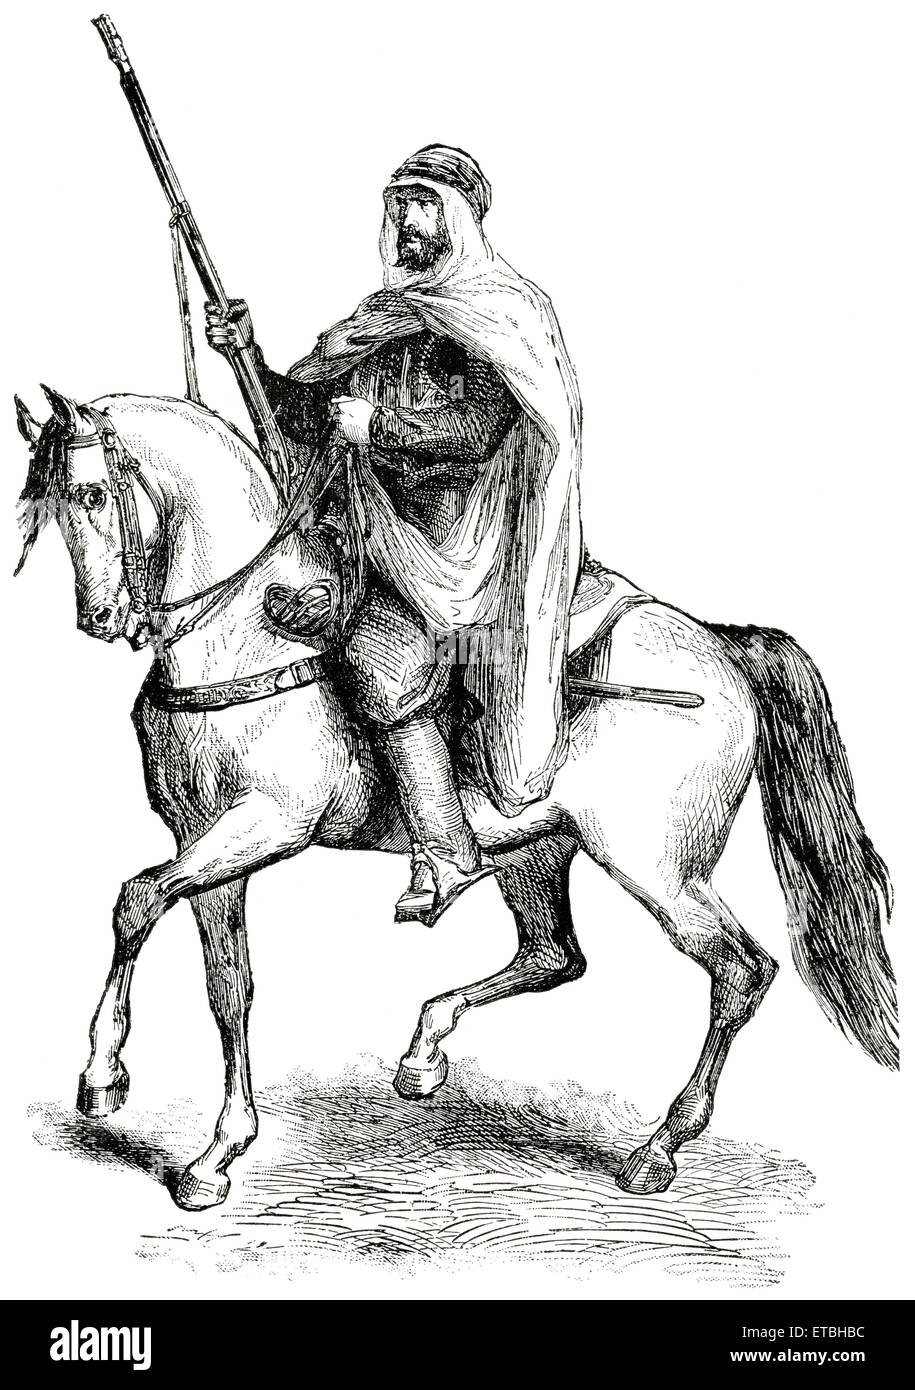 Native Algerian Soldier on Horseback in the Service of France, 'Classical Portfolio of Primitive Carriers', by Marshall M. Kirman, World Railway Publ. Co., Illustration, 1895 Stock Photo